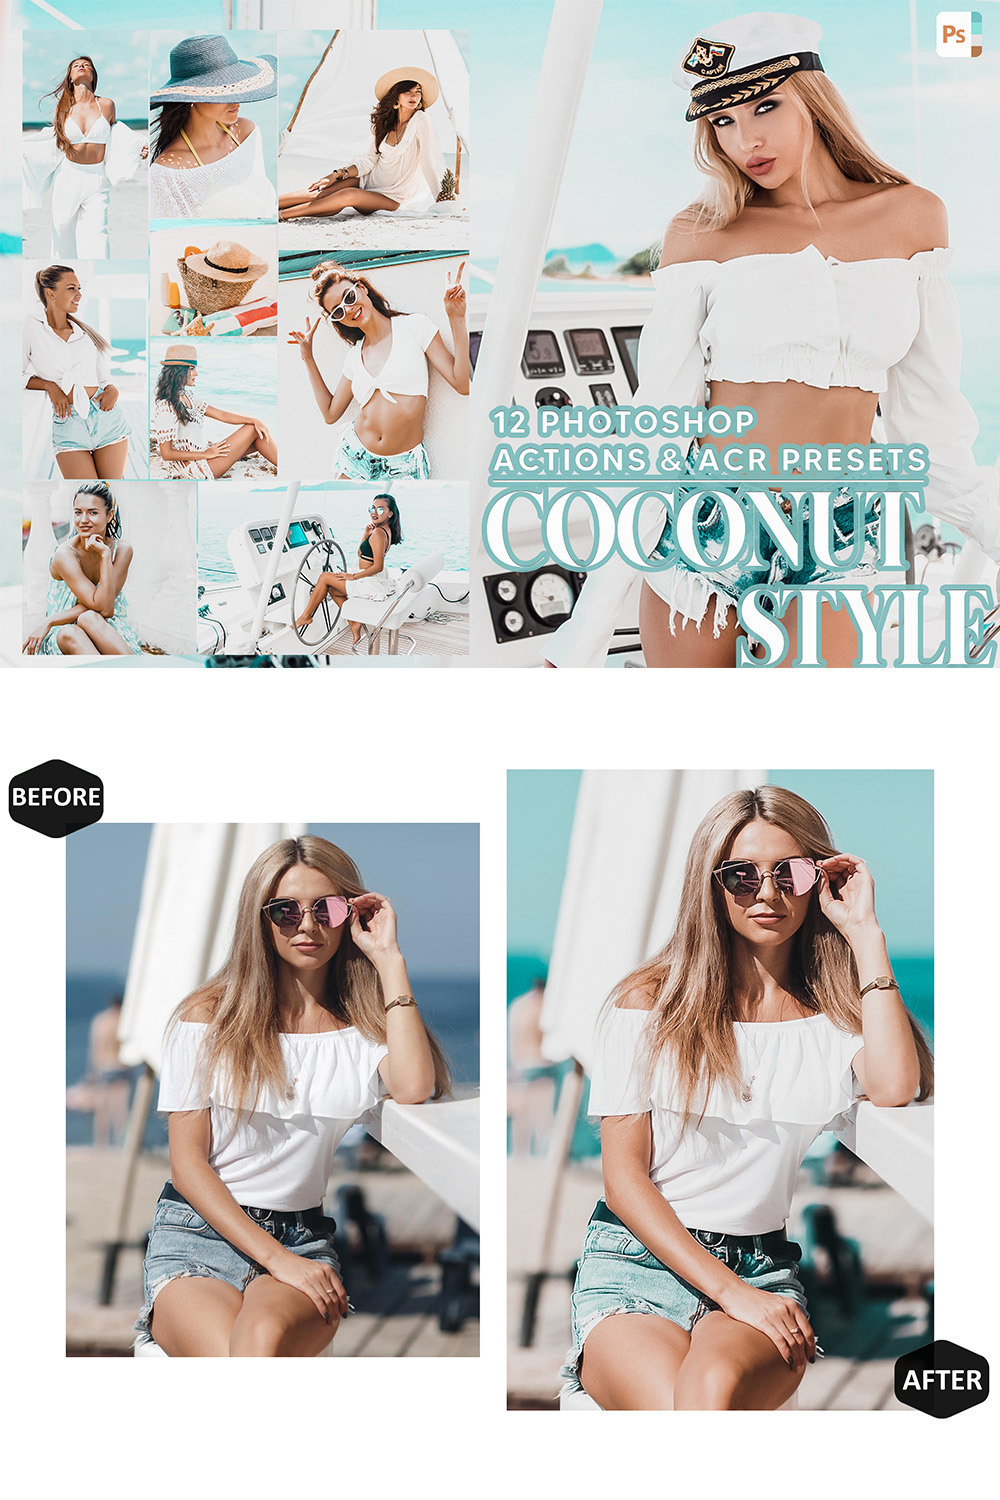 12 Photoshop Actions, Coconut Style Ps Action, Airy White ACR Preset, Summer Bright Ps Filter, Atn Portrait And Lifestyle Theme For Instagram, Blogger pinterest preview image.